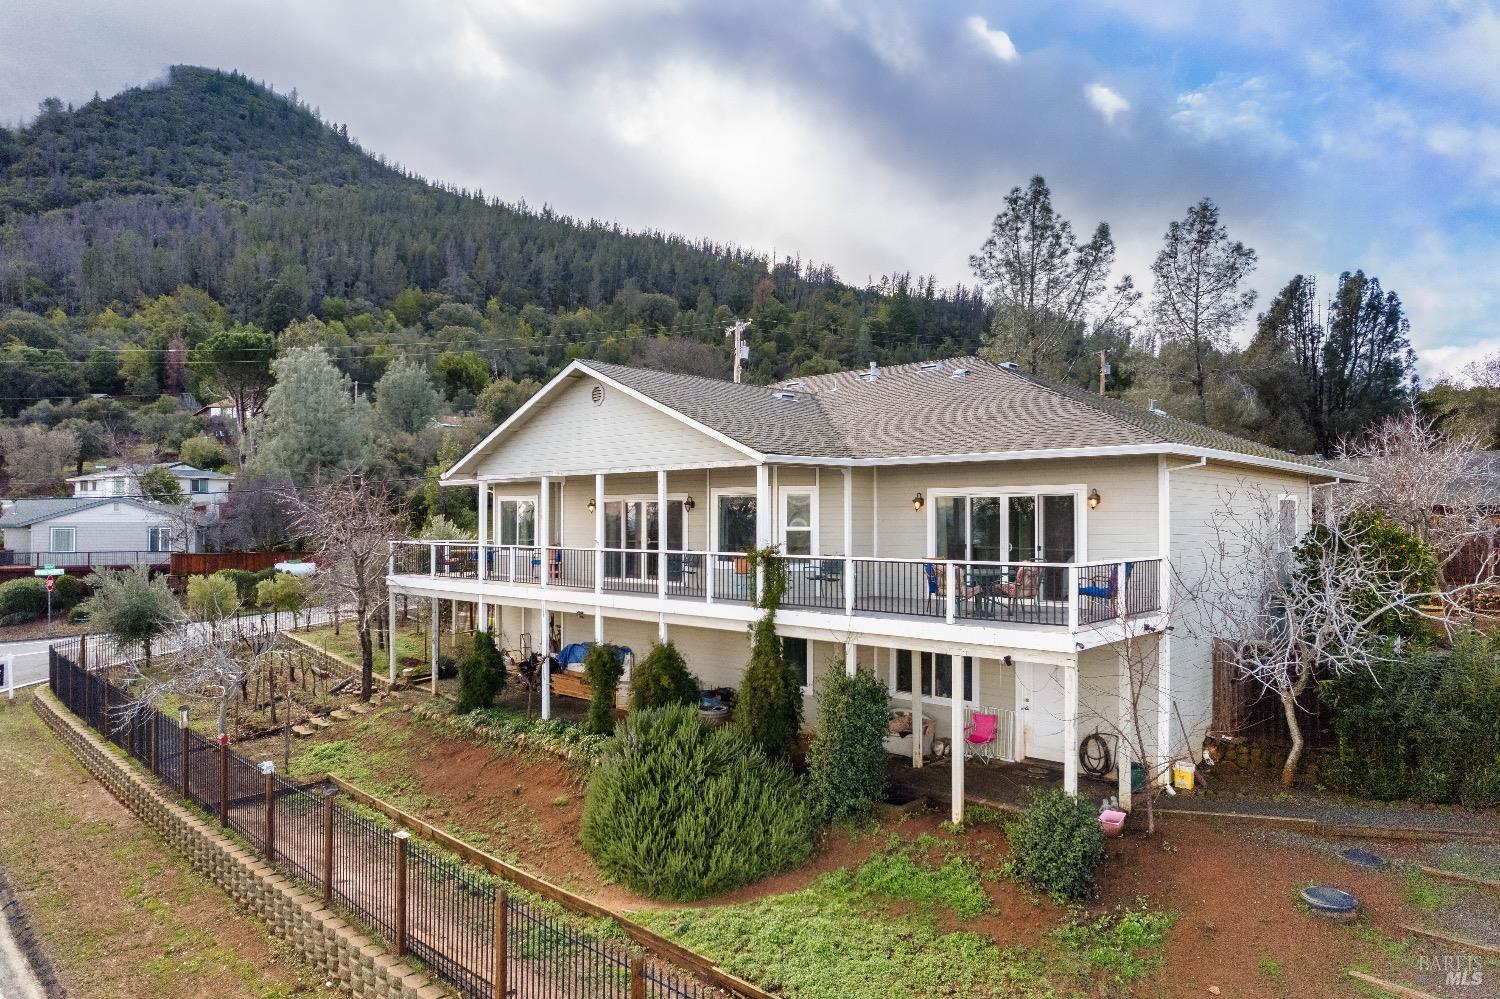 Photo of 3140 E Riviera Heights Dr E in Kelseyville, CA